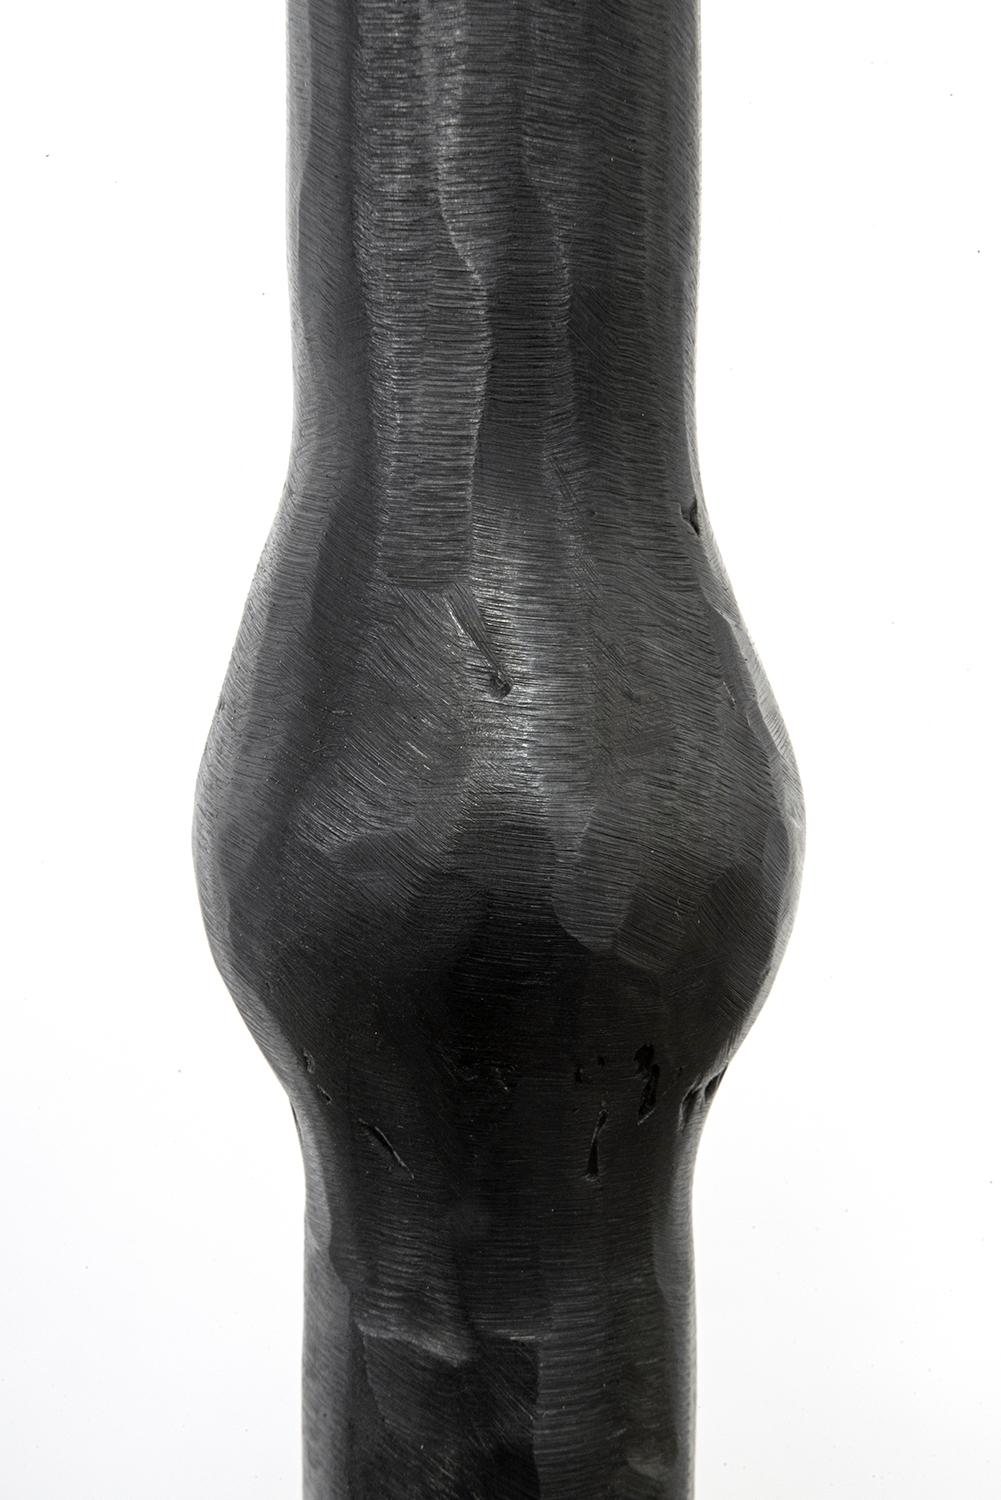 American Floor Lamp Classic Contemporary Hand-Sculpted Blackened Steel and Linen Shade For Sale